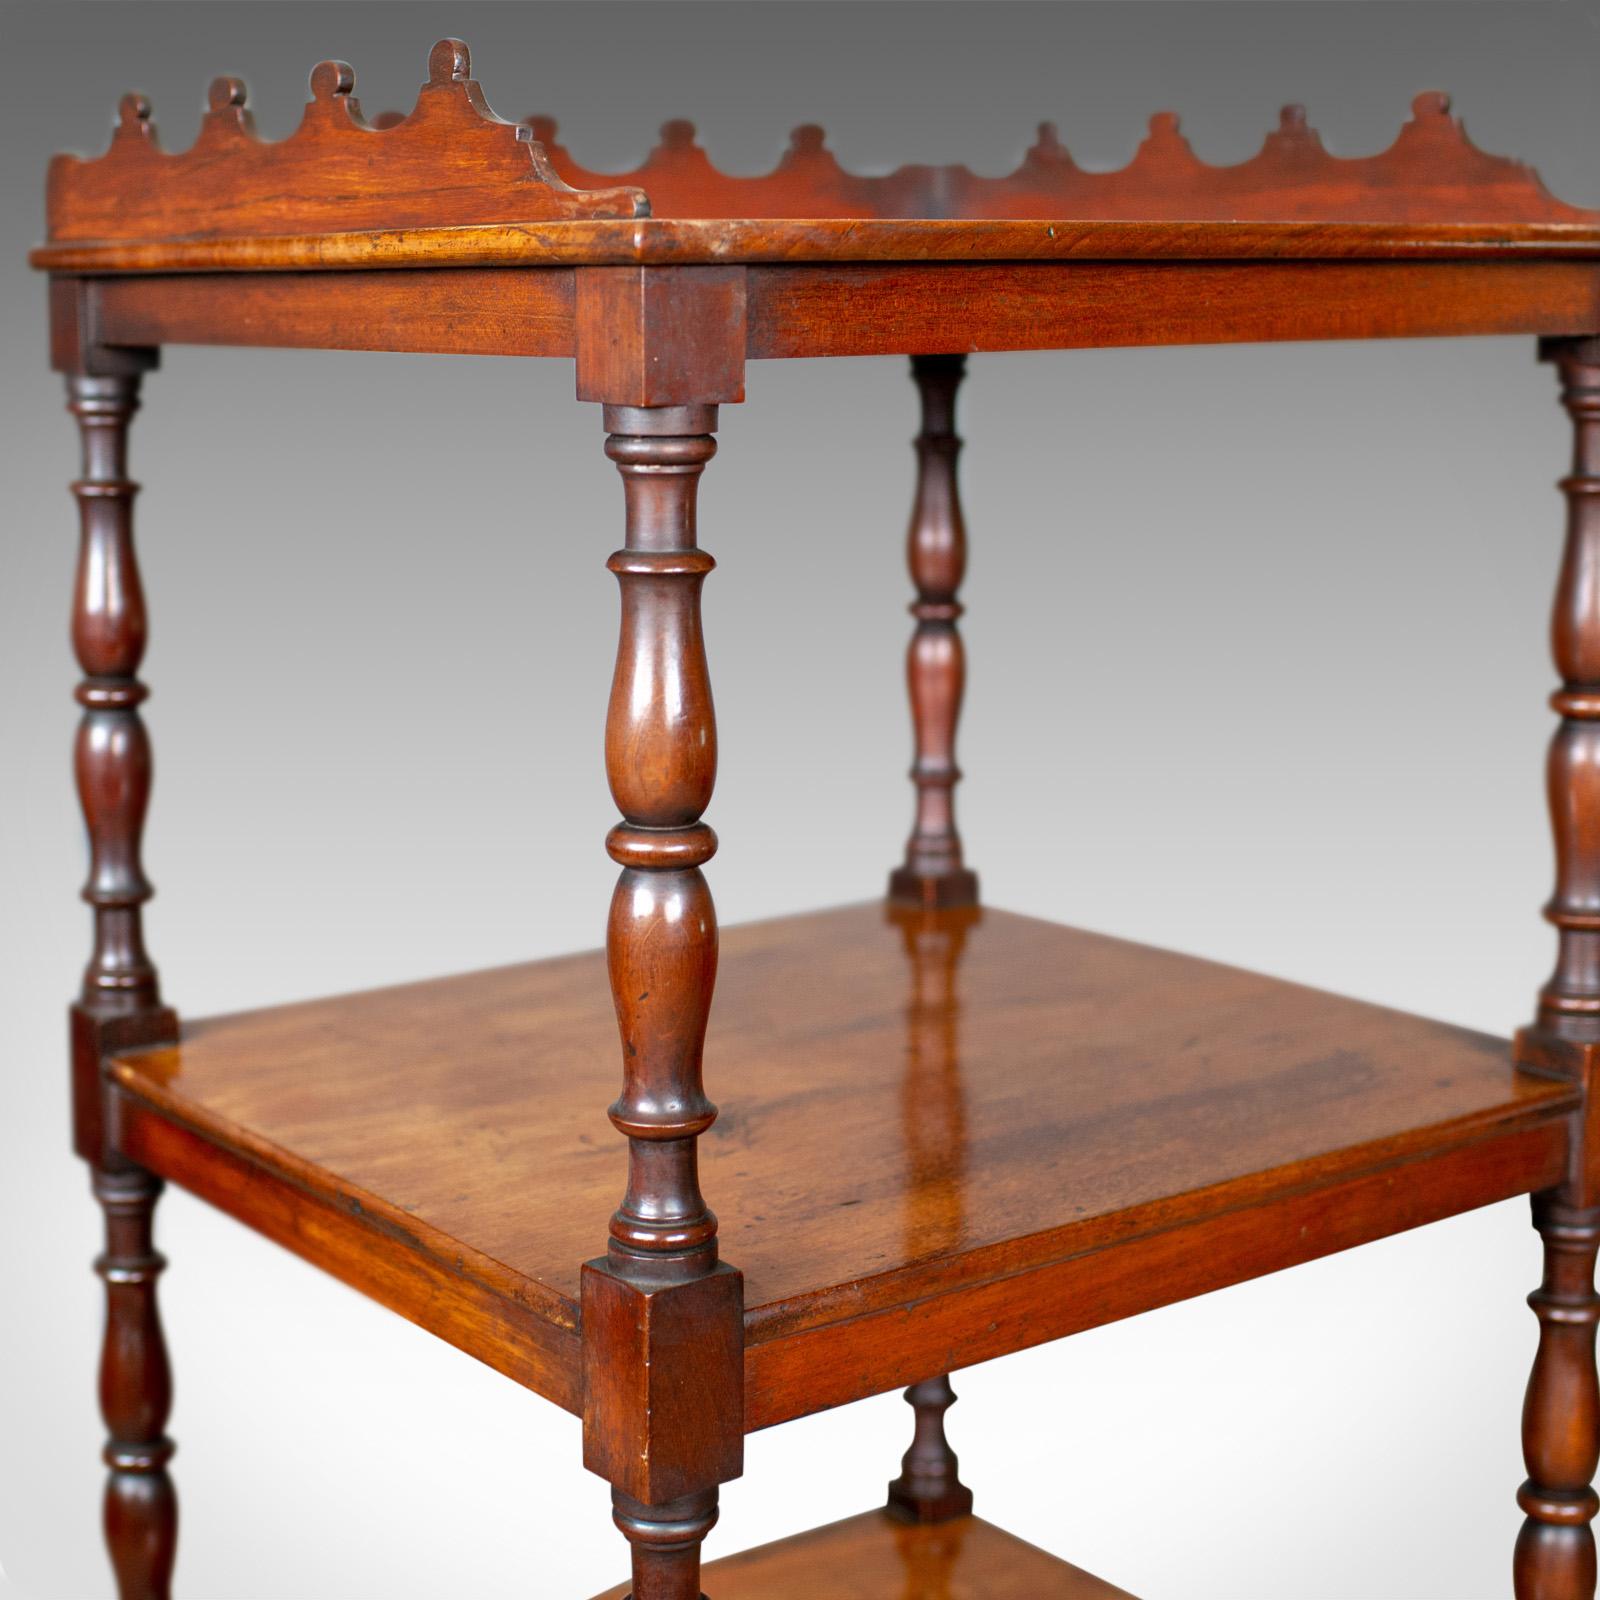 Antique Whatnot, English, Mahogany, Four-Tier, Regency, Display Stand circa 1820 1